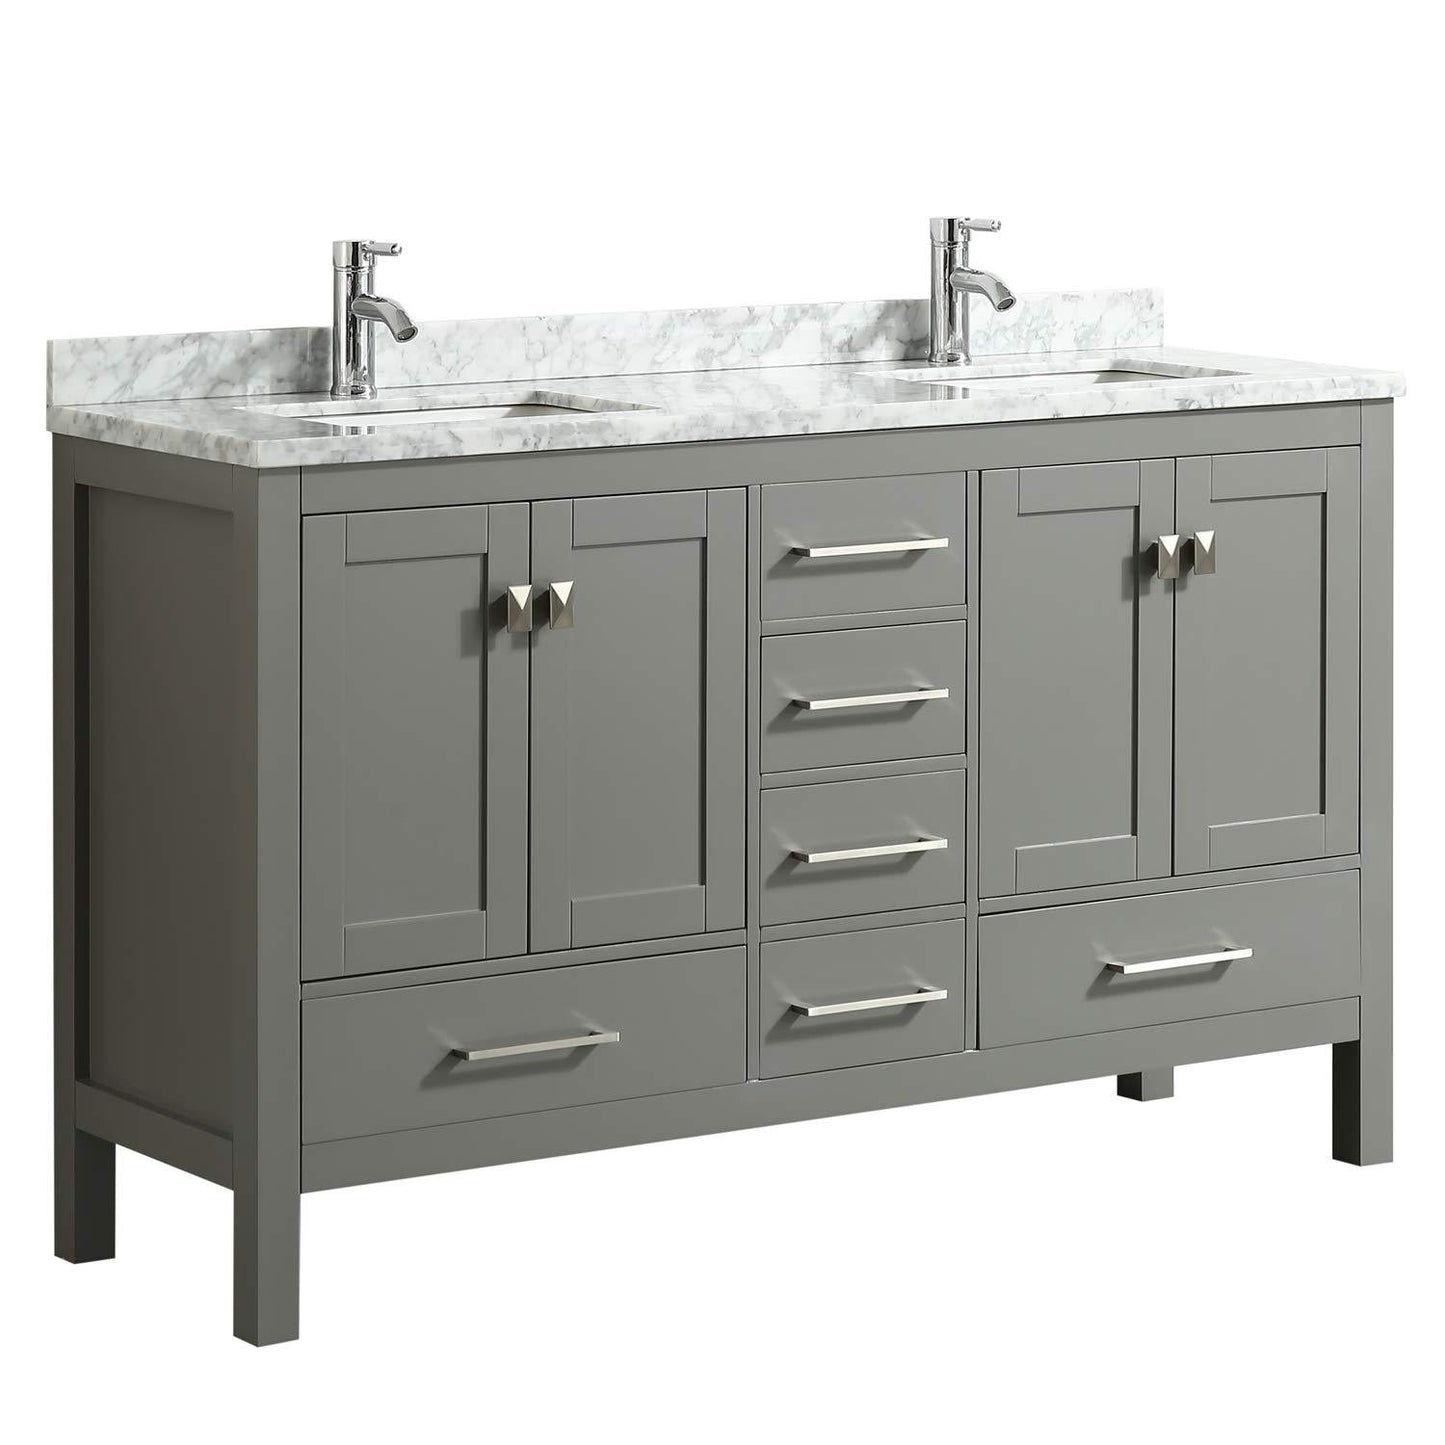 Eviva London 60" X 18" Transitional bathroom vanity with Crema marfil marble and double Porcelain Sinks - Luxe Bathroom Vanities Luxury Bathroom Fixtures Bathroom Furniture